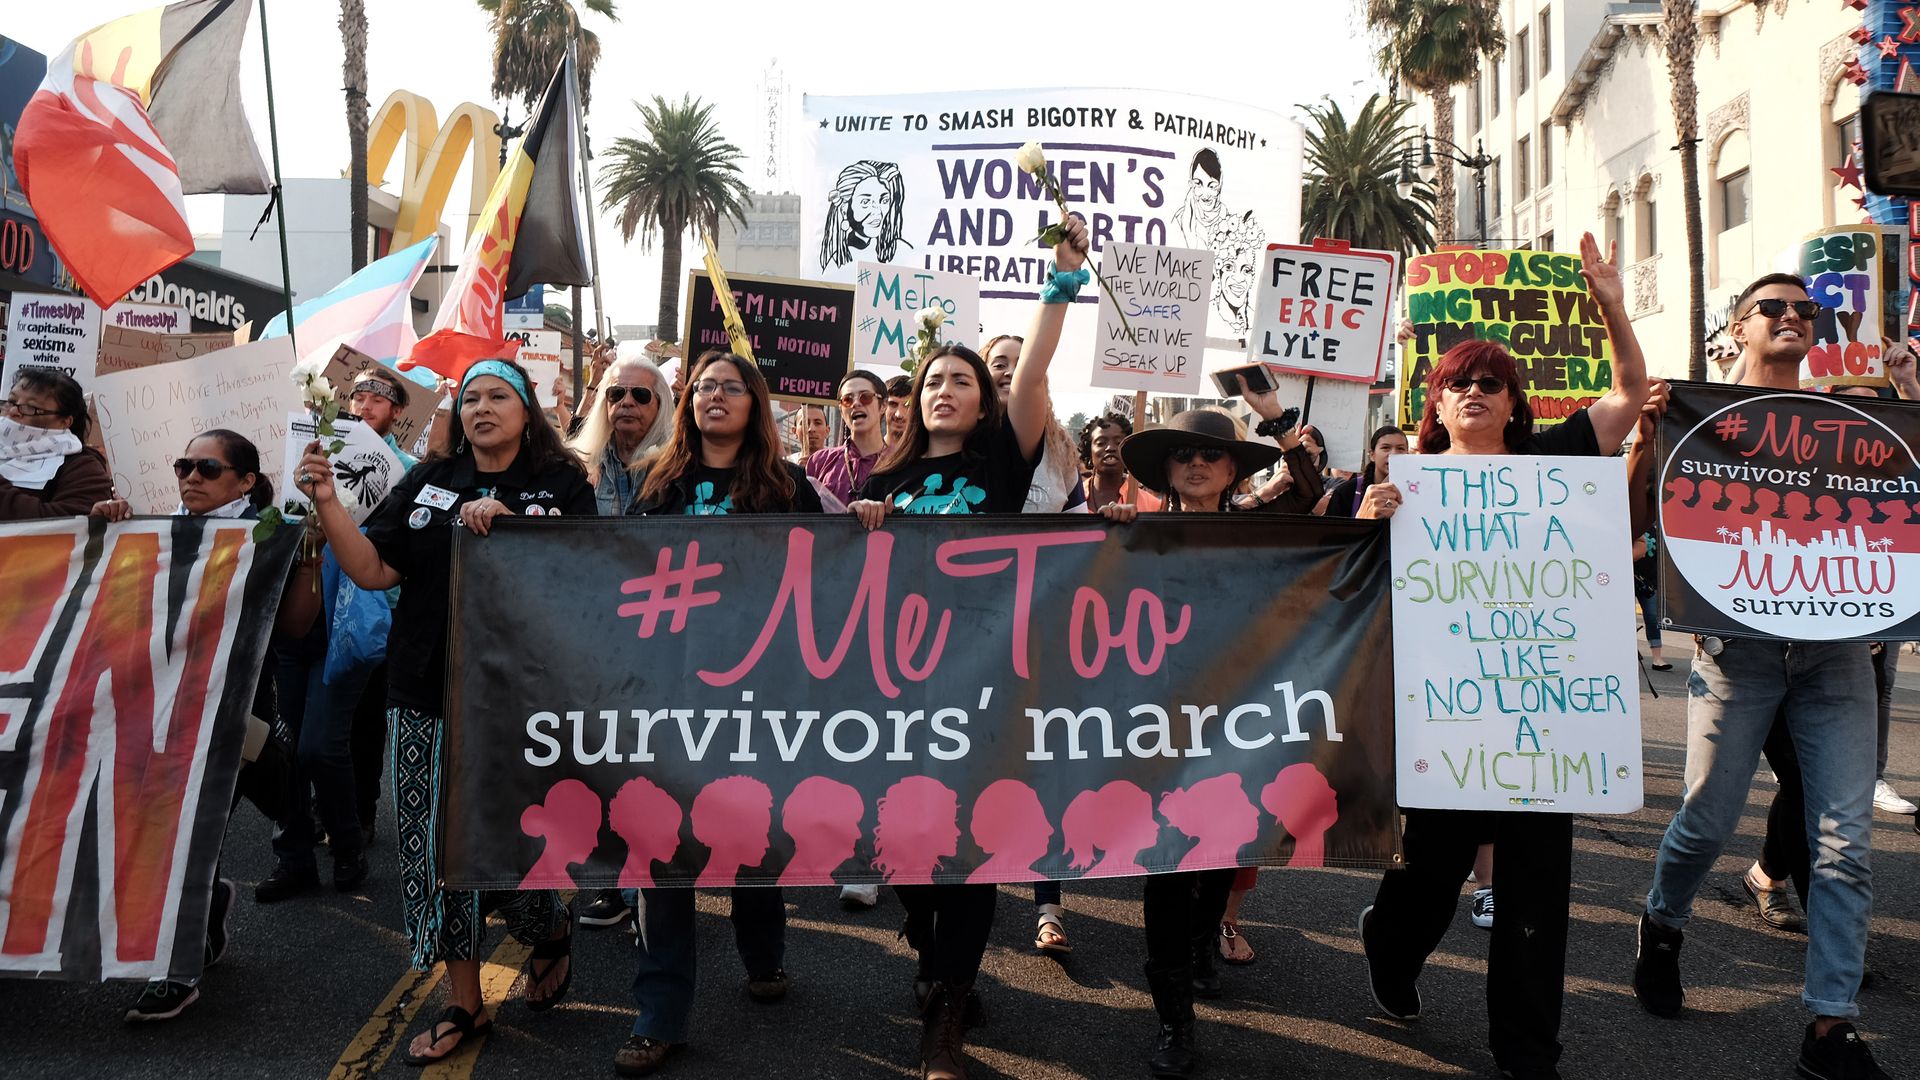 Activists participate in the 2018 #MeToo March on November 10, 2018 in Hollywood, California. (Photo by Sarah Morris/Getty Images)